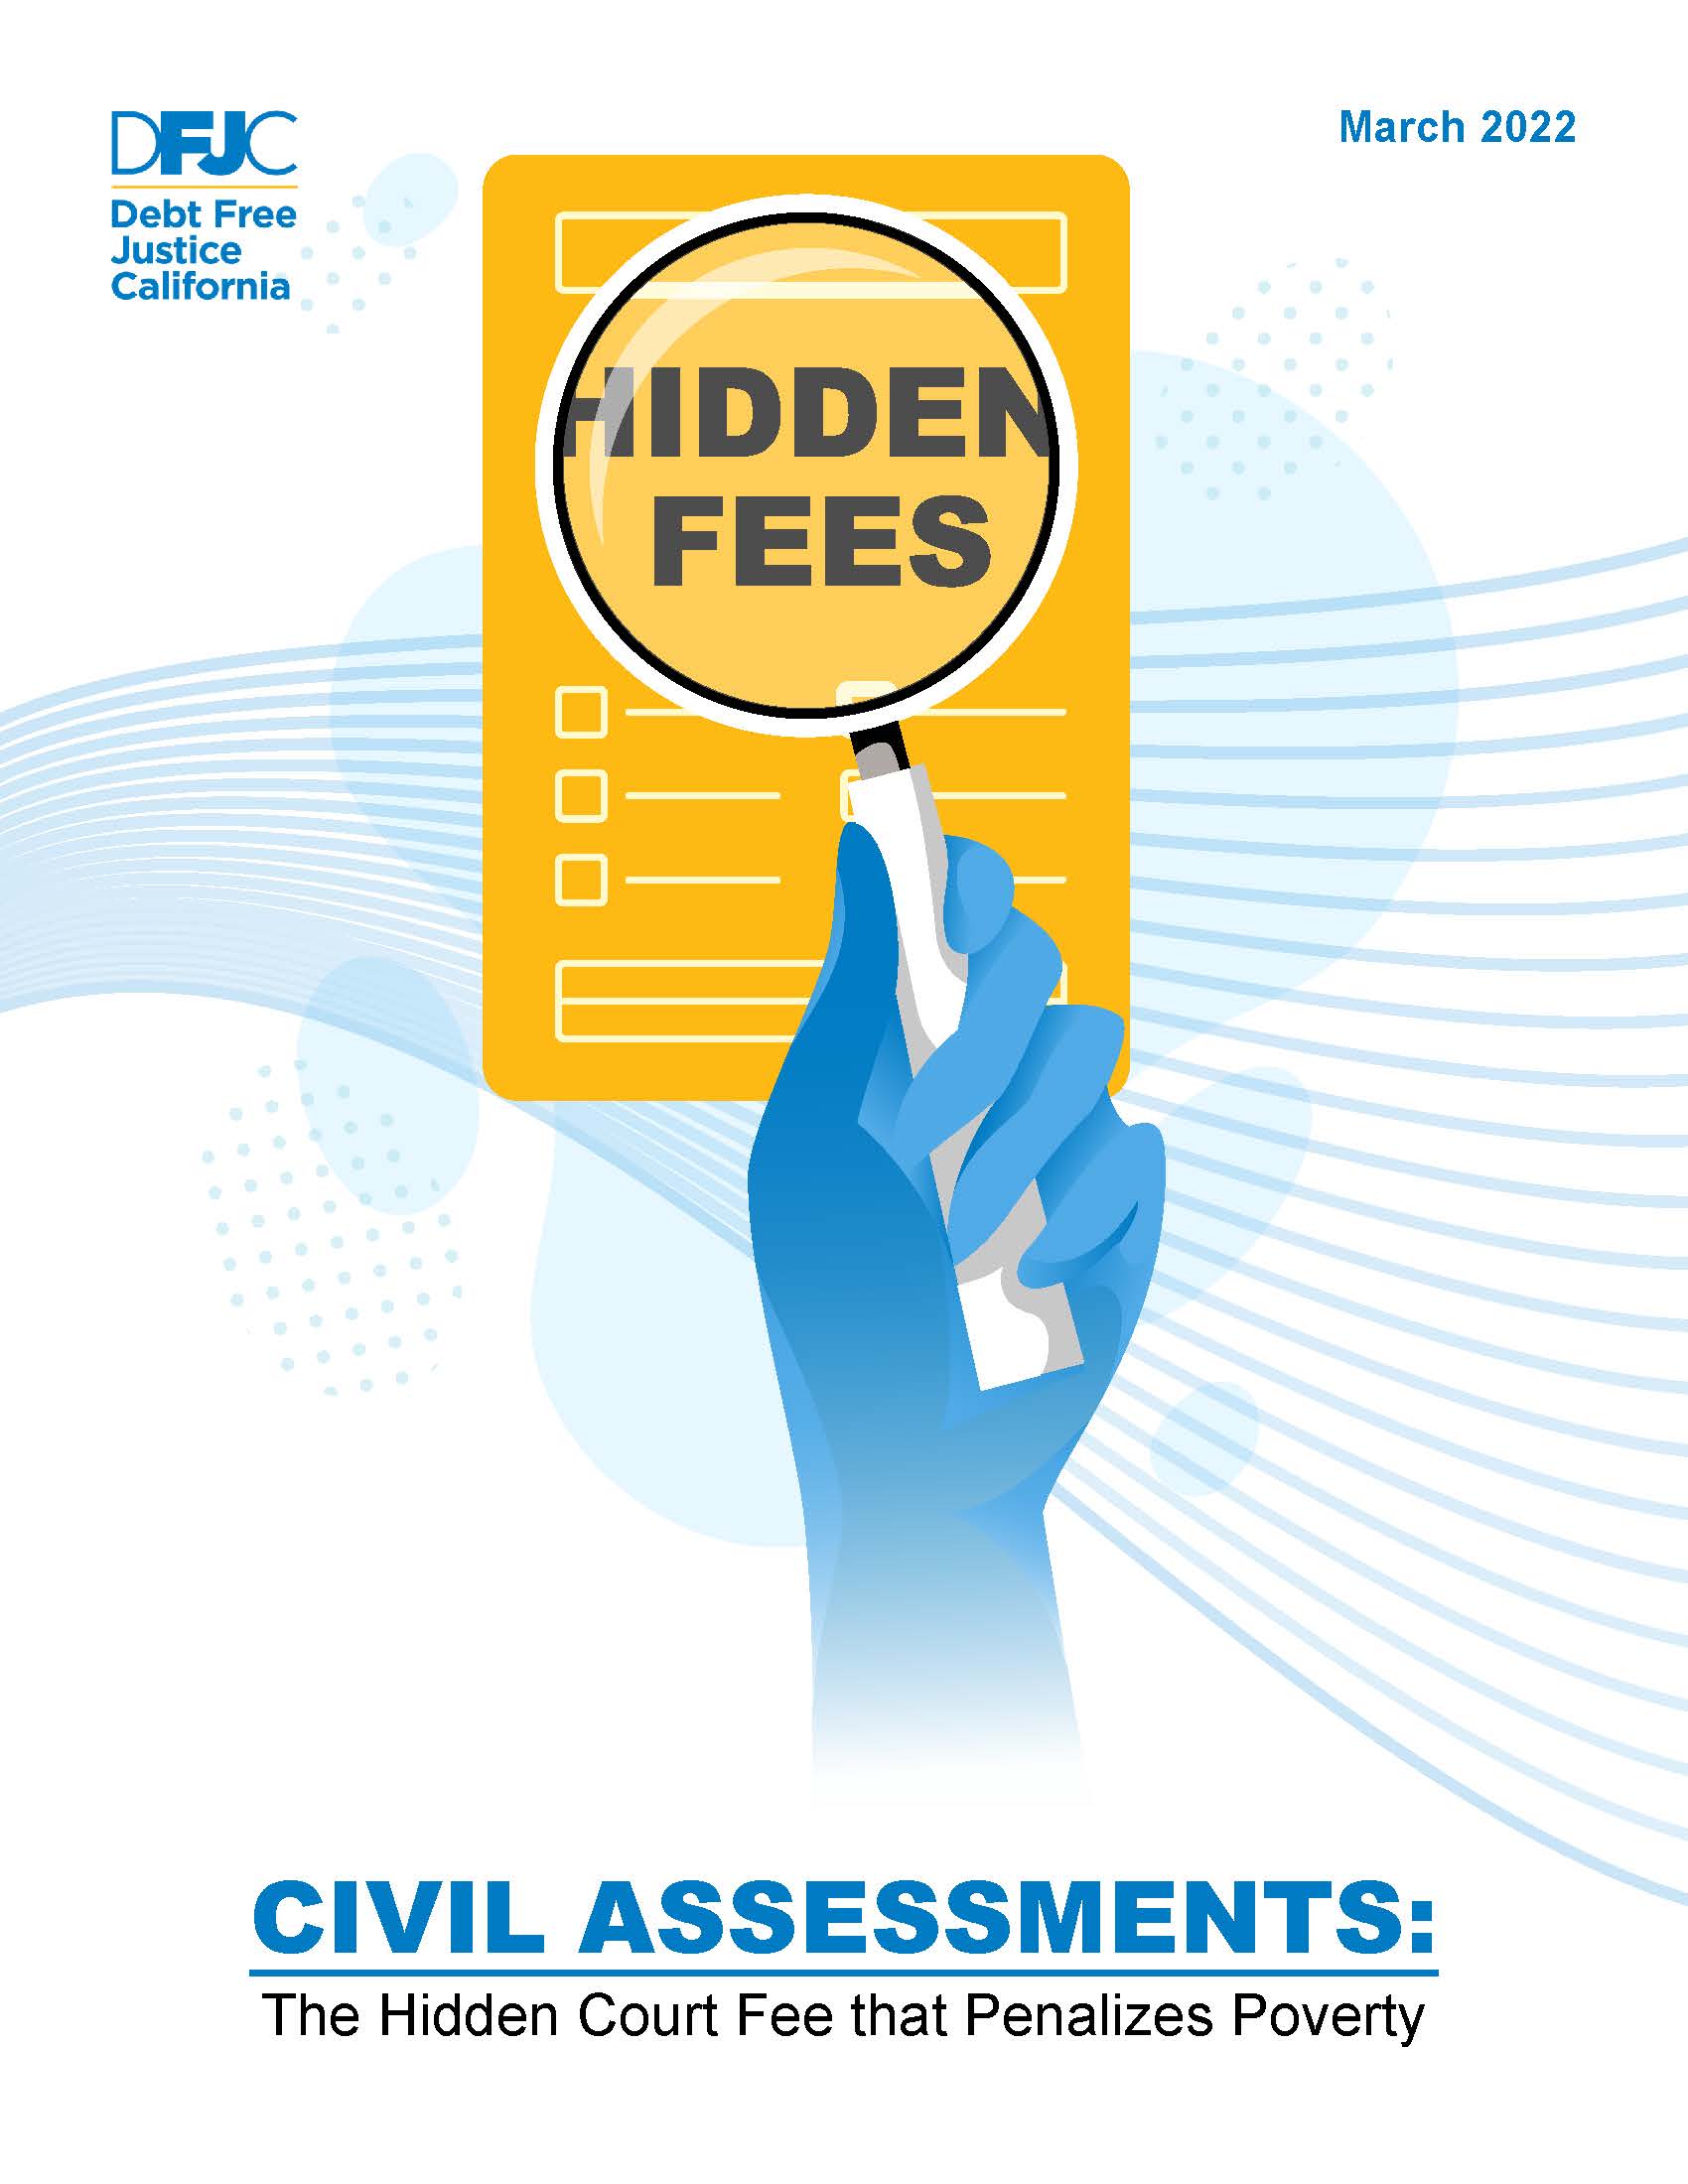 View PDF report: "Civil Assessments: The Hidden Court Fee that Penalizes Poverty (2022)"